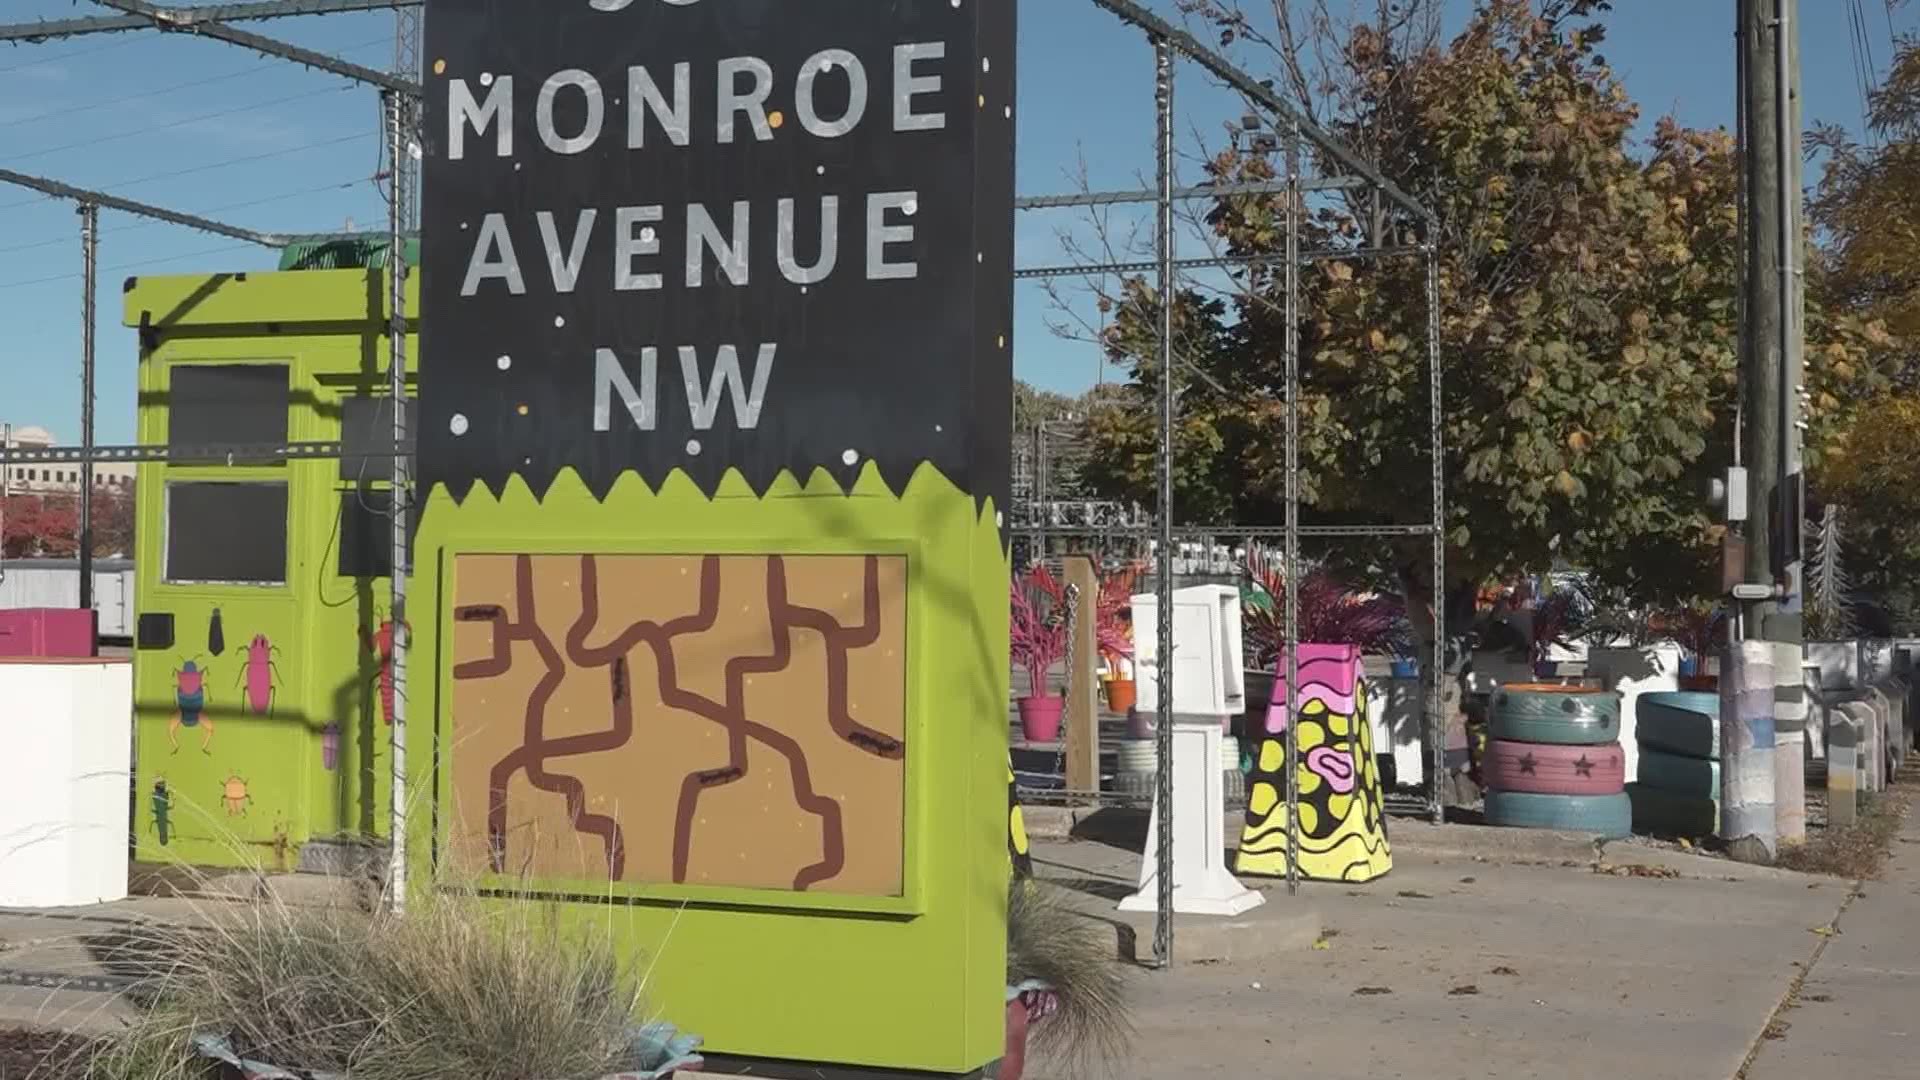 If you roller skate, skate board, bike or scooter, there is now a place downtown just for you.